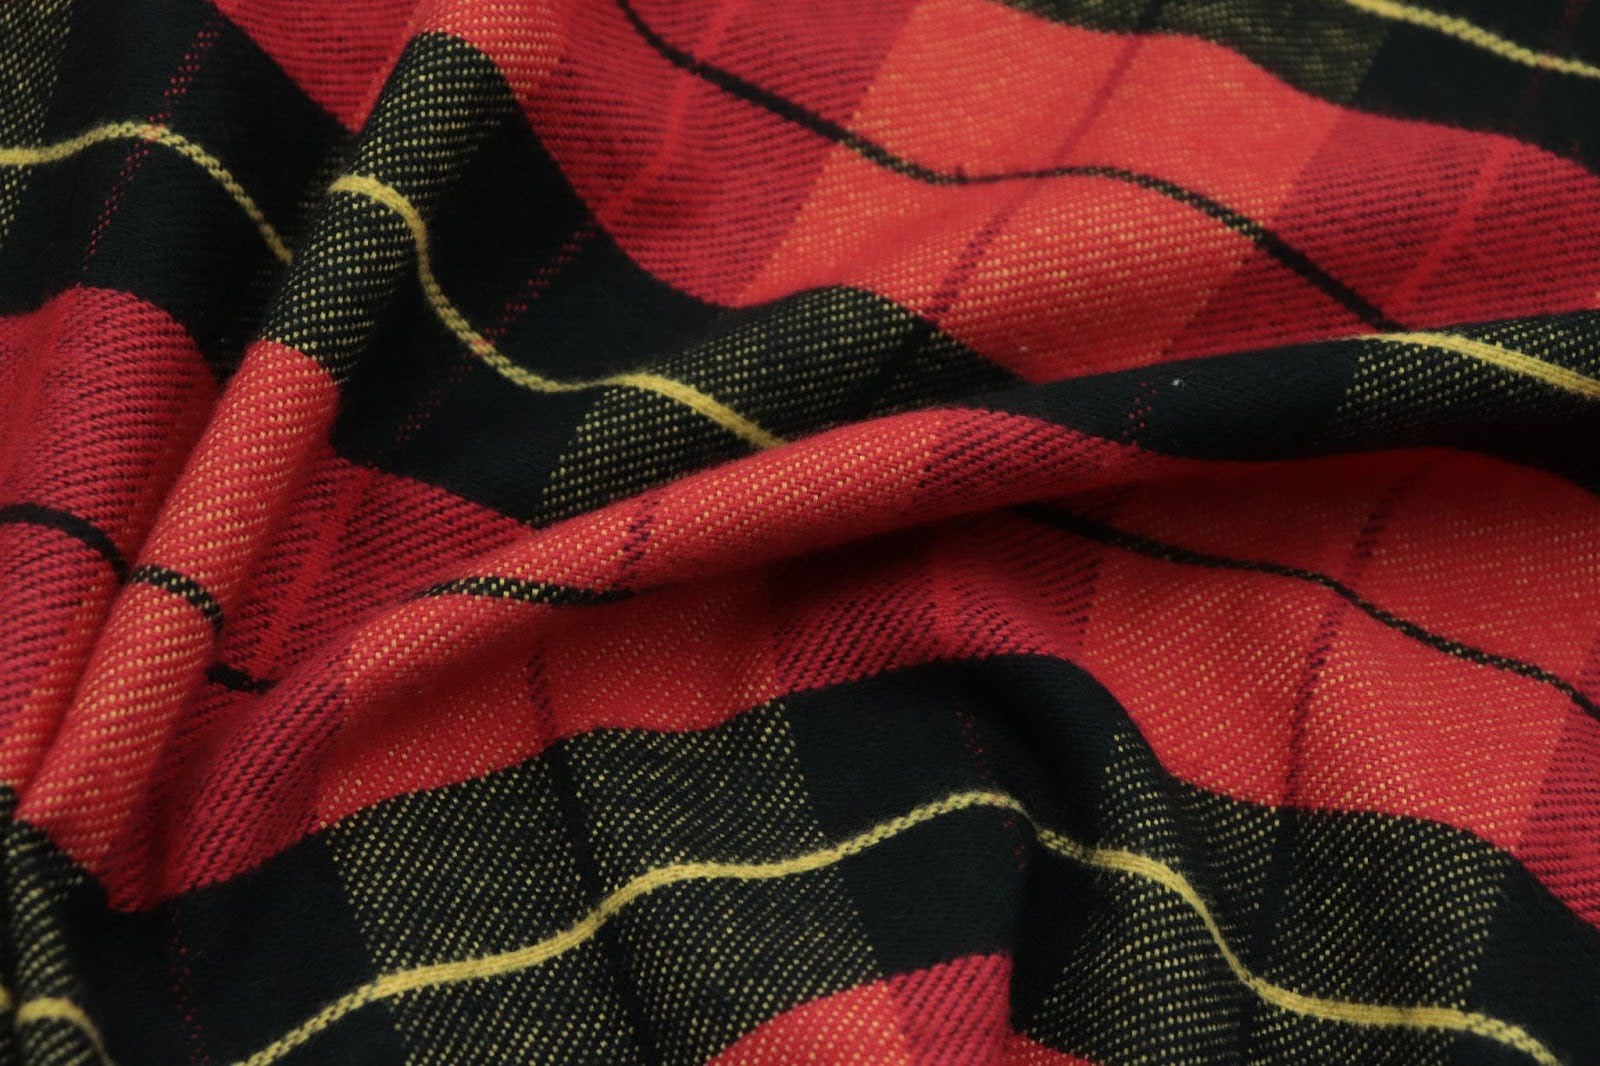 A close up of a red and black checkered blanket with yellow stripes